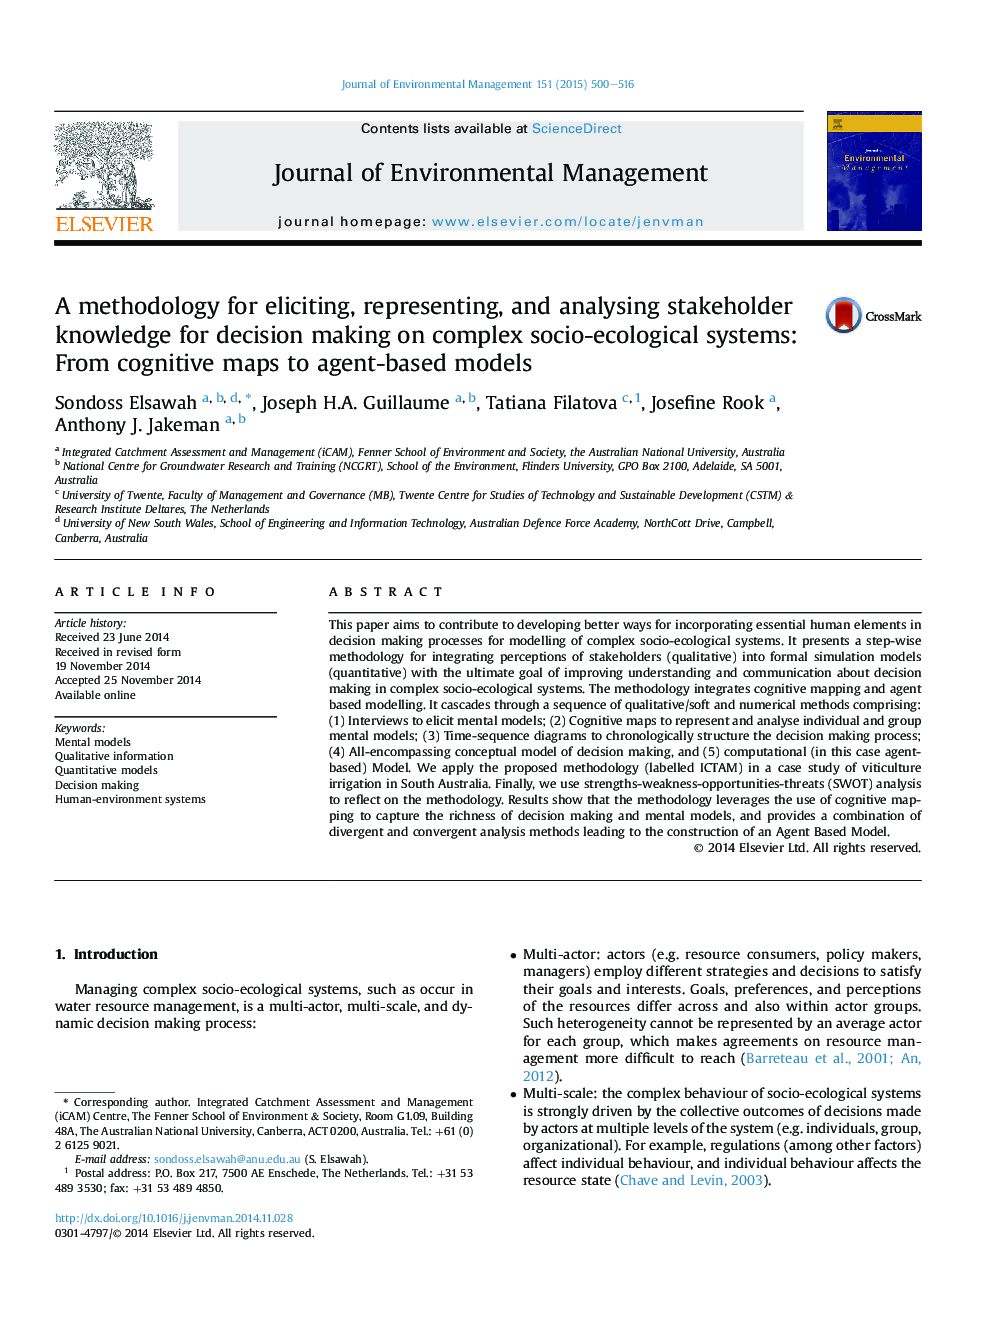 A methodology for eliciting, representing, and analysing stakeholder knowledge for decision making on complex socio-ecological systems: From cognitive maps to agent-based models